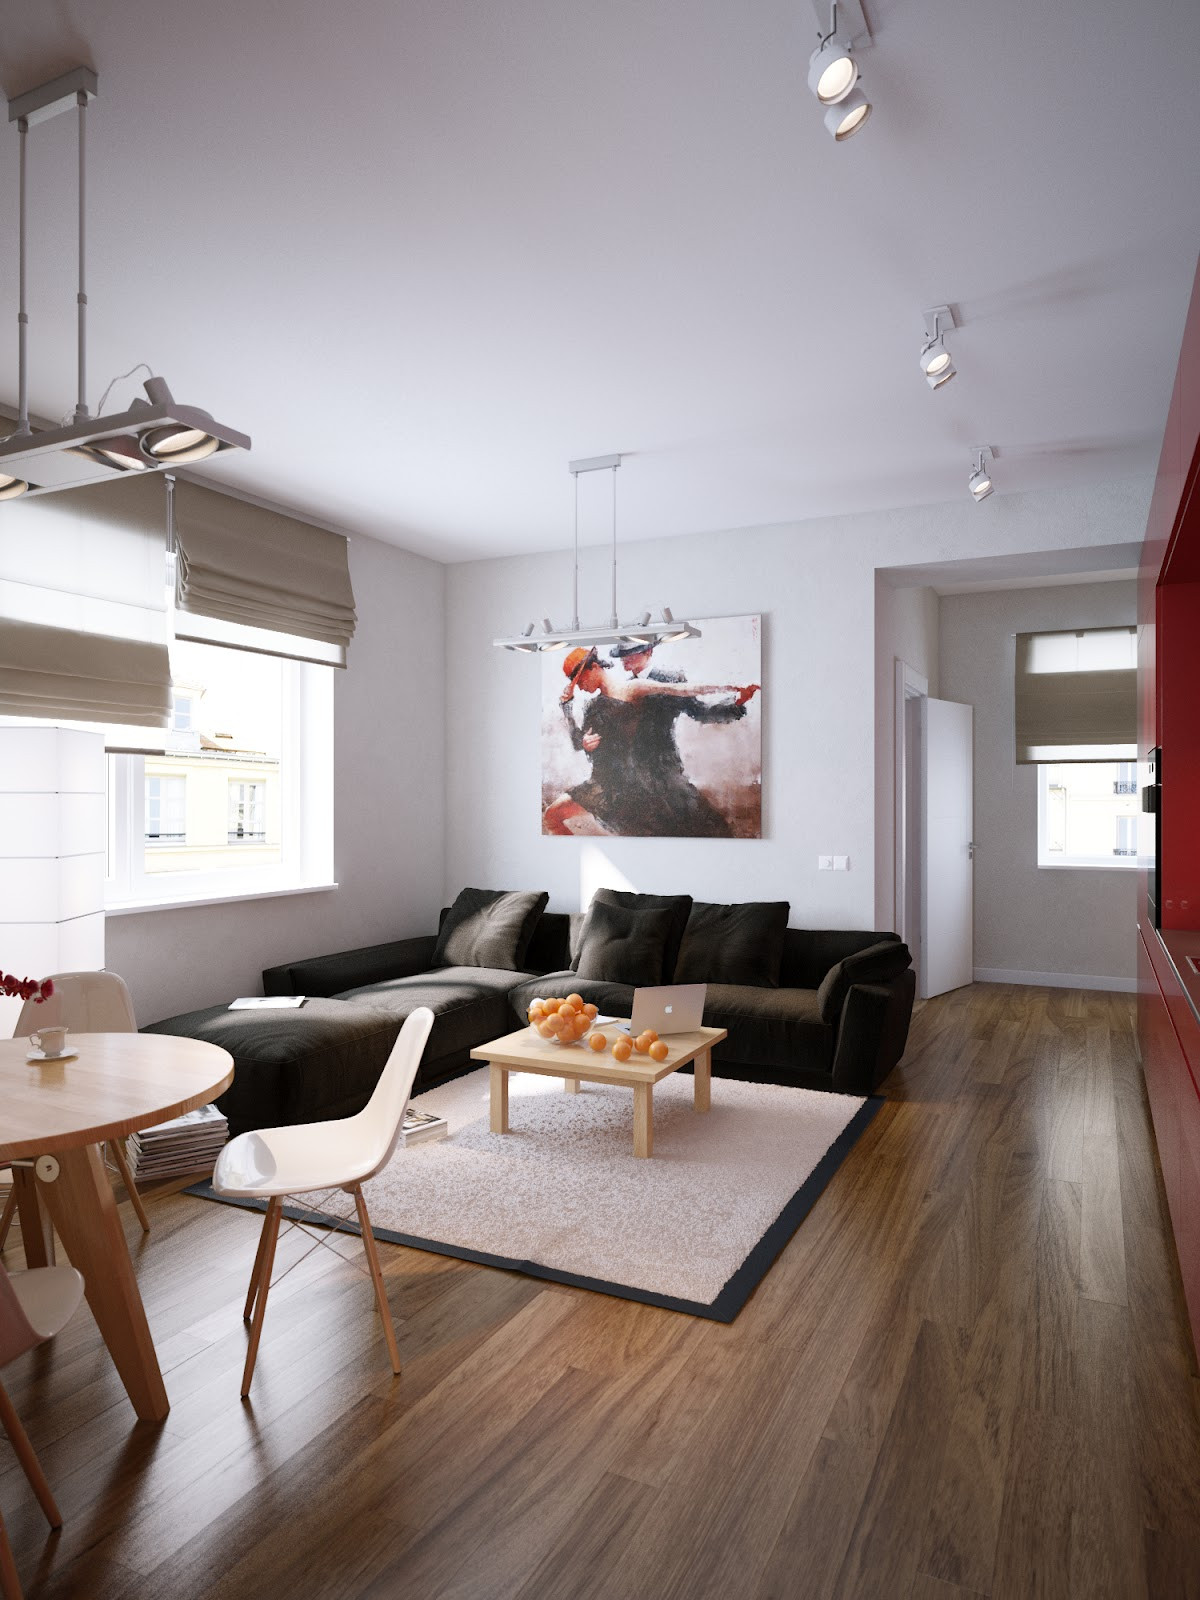 L Shaped Living Room Ideas
 Modern Red Apartment For A Young Couple [Visualized]